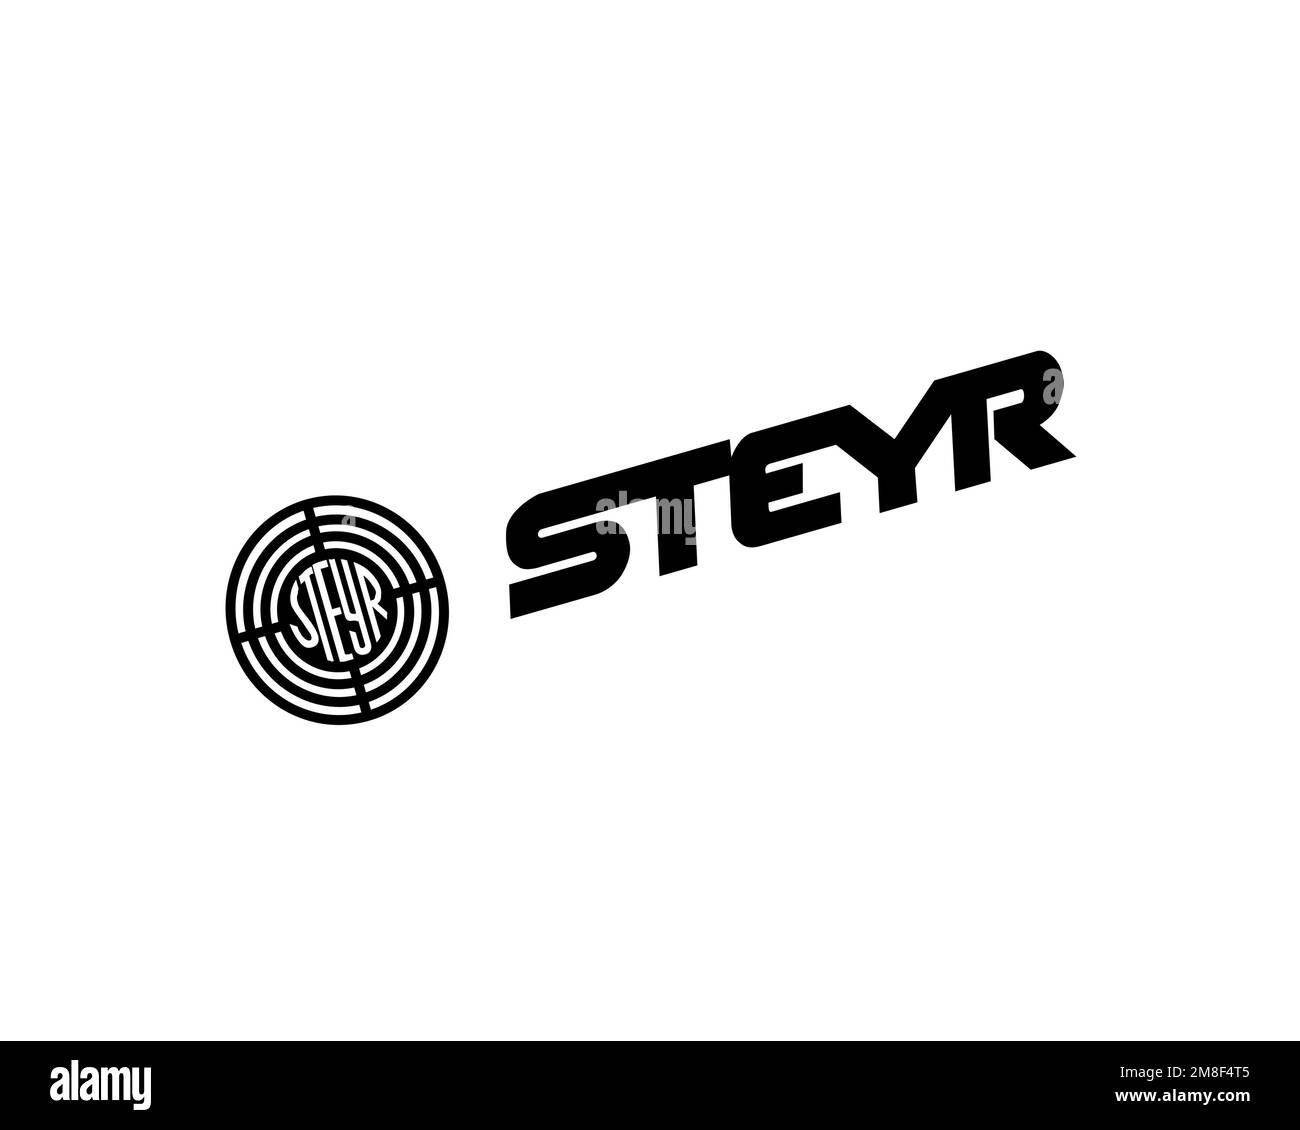 Steyr Daimler Puch, rotated logo, white background Stock Photo